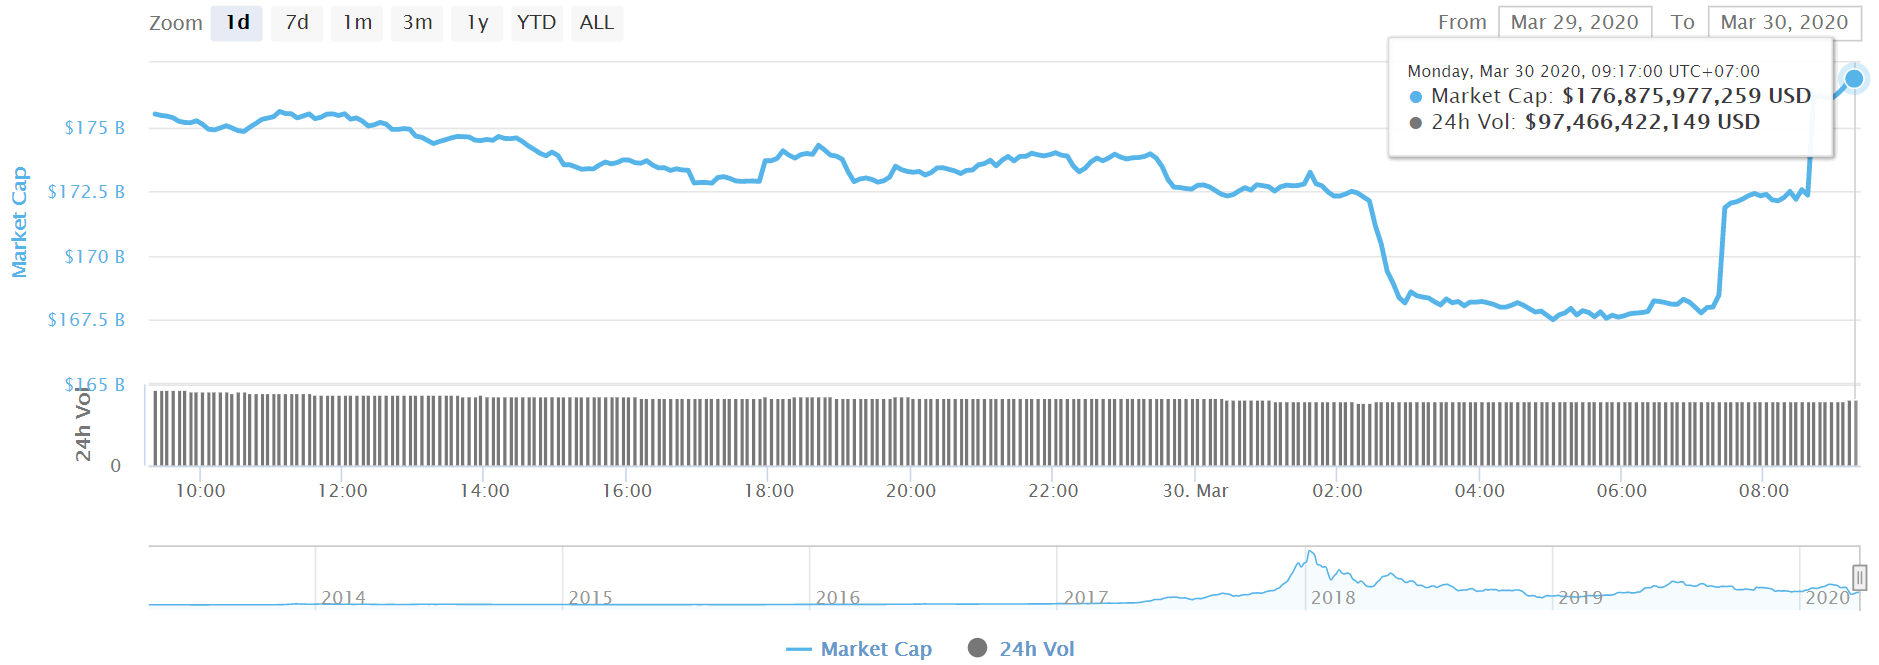 Total market capitalization of cryptocurrencies